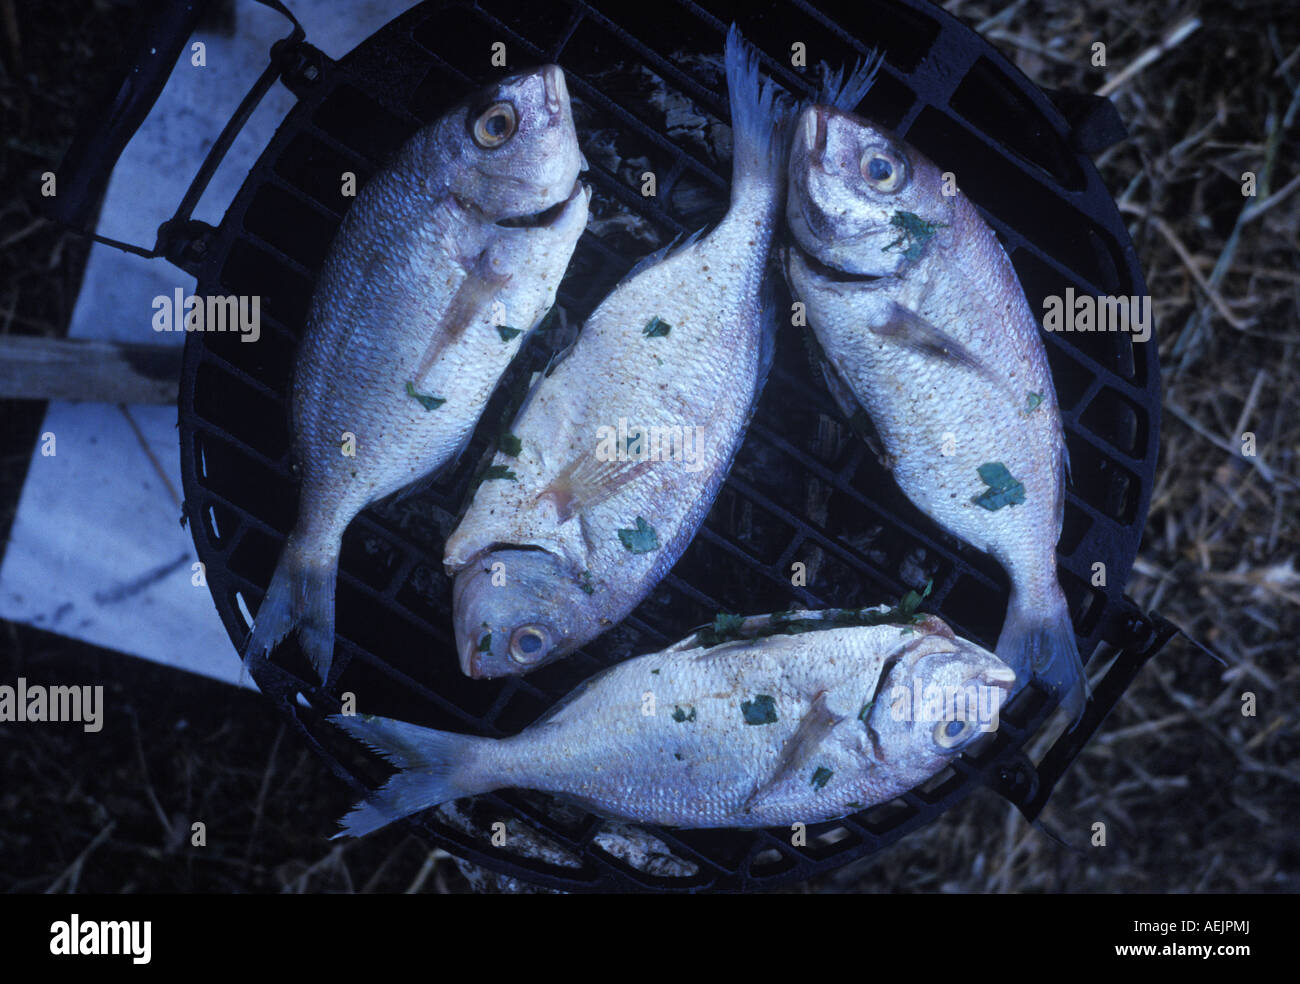 Three barbs on a barbecue Stock Photo